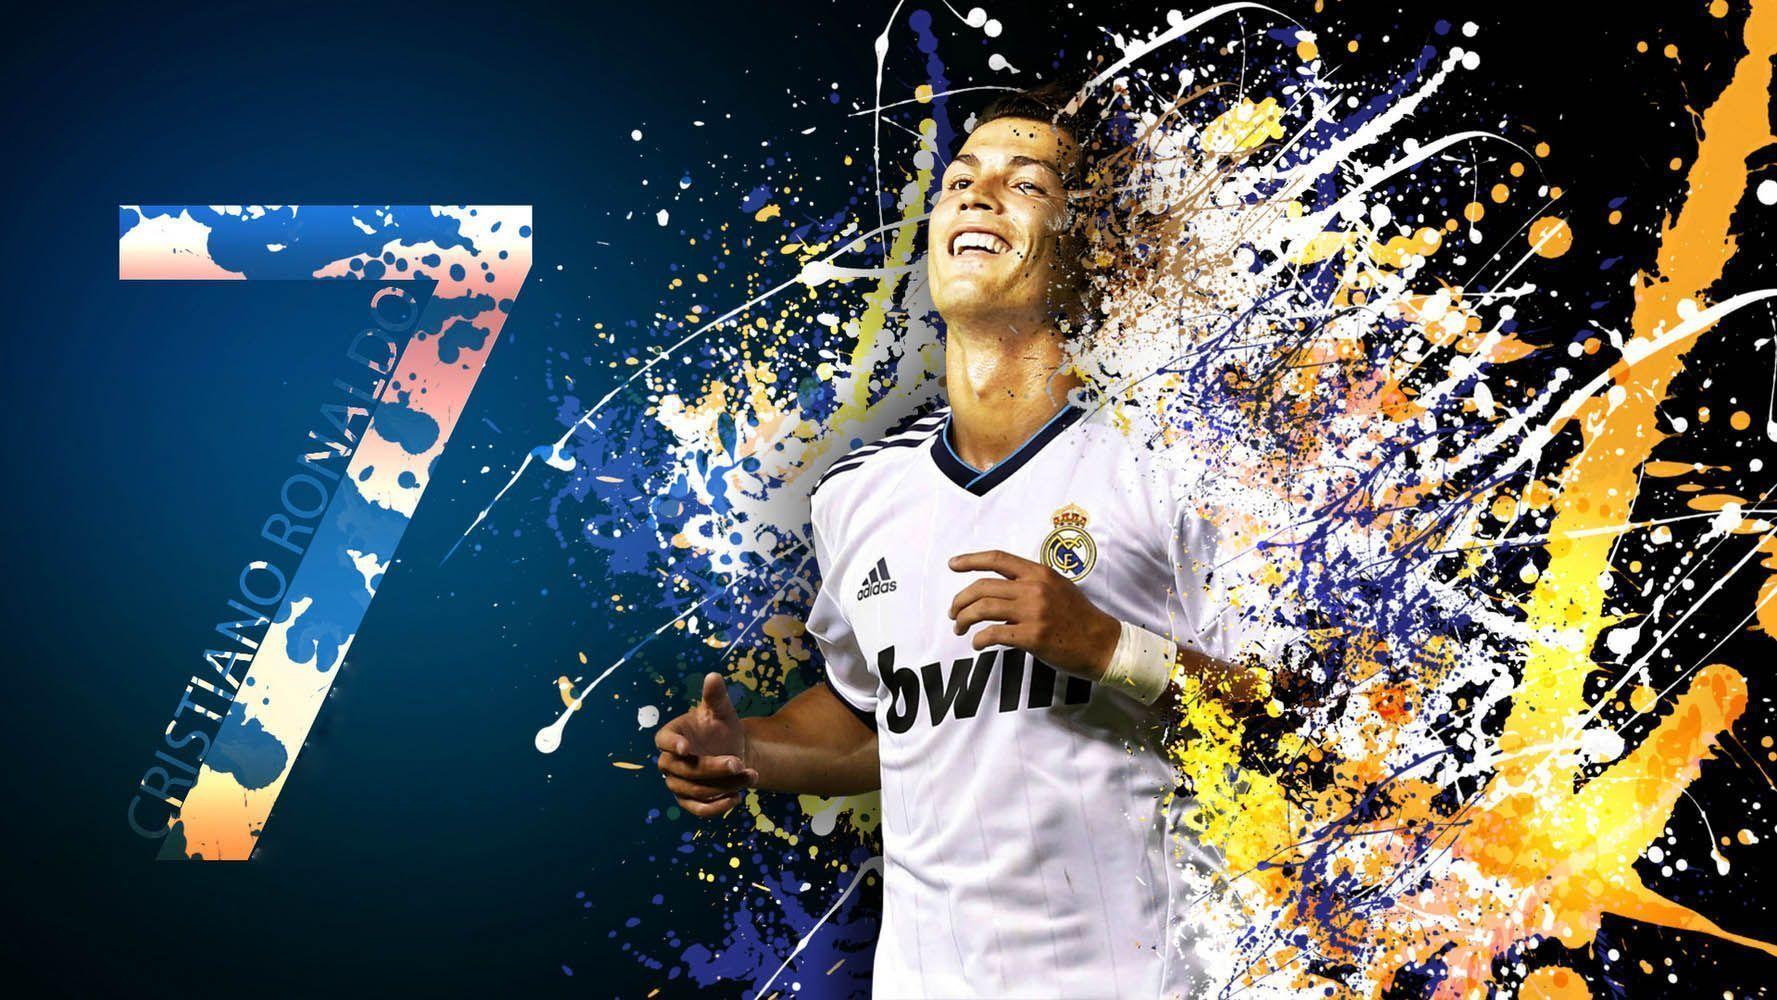 Collection Of HD Ronaldo Wallpaper On Wall Papers.info